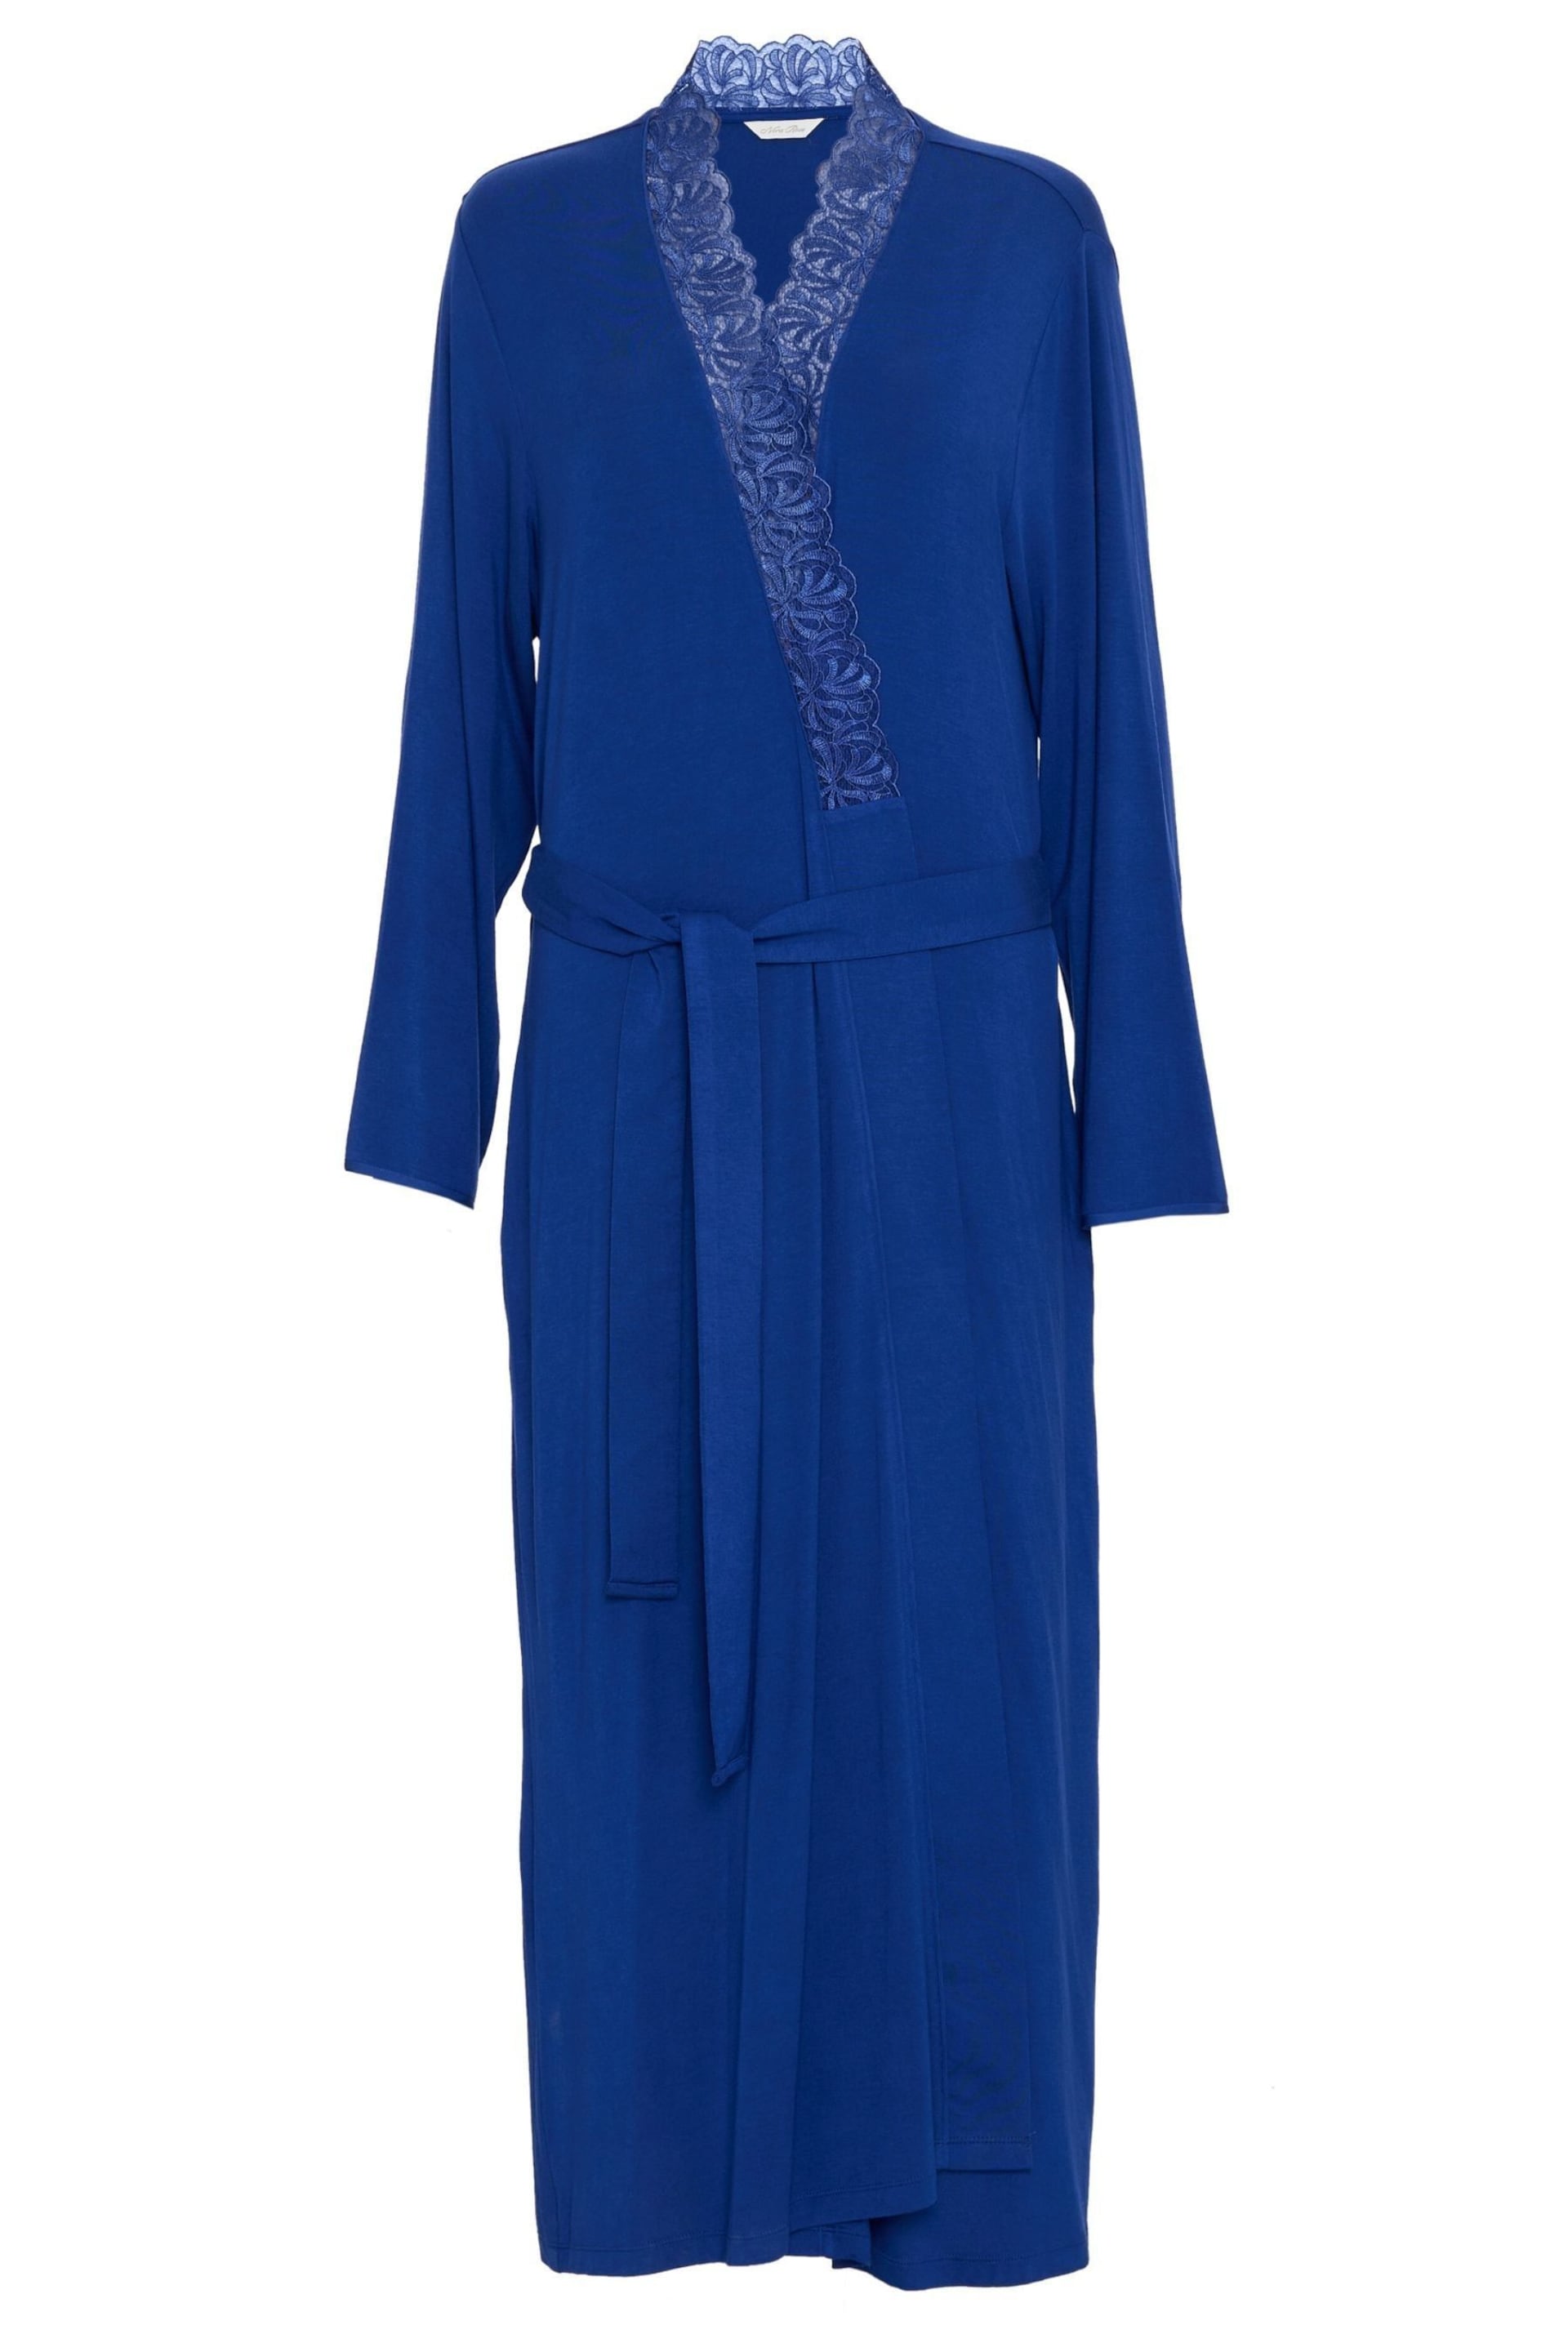 Nora Rose Light Blue Jersey Long Dressing Gown - Image 4 of 4